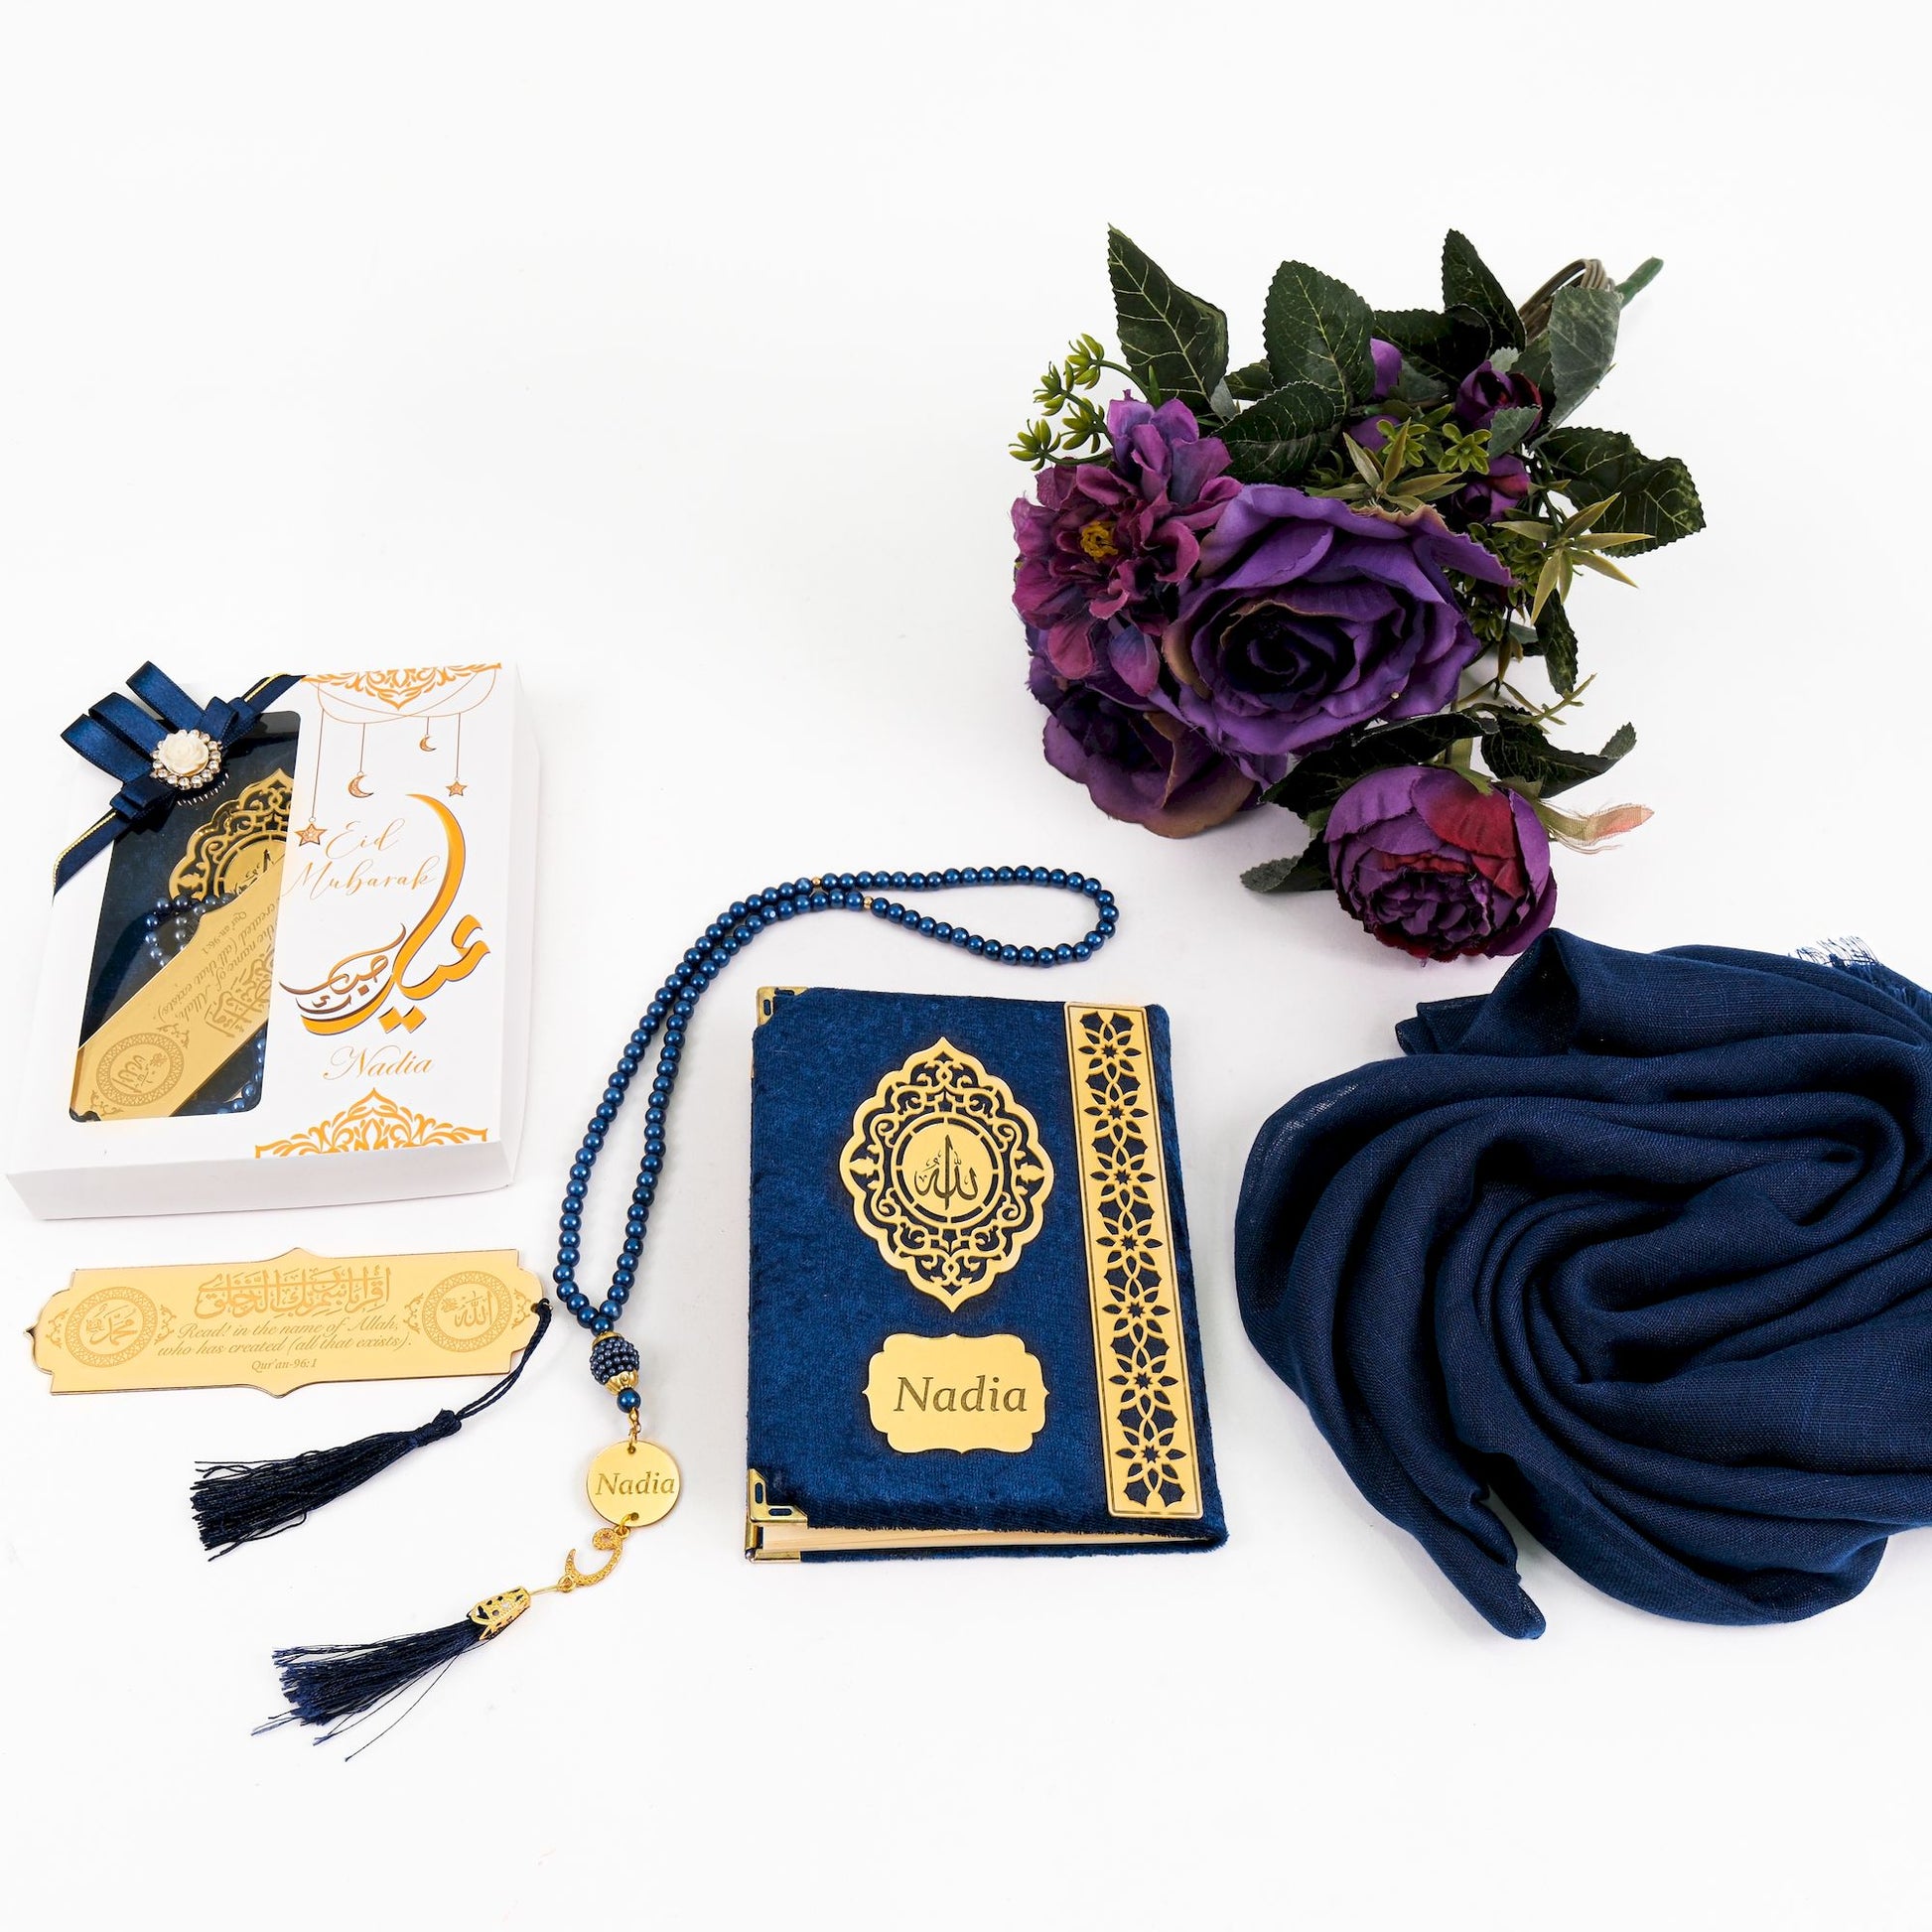 Personalized Yaseen Dua Book Hijab Bookmark Tasbeeh Ramadan Gift Set - Islamic Elite Favors is a handmade gift shop offering a wide variety of unique and personalized gifts for all occasions. Whether you're looking for the perfect Ramadan, Eid, Hajj, wedding gift or something special for a birthday, baby shower or anniversary, we have something for everyone. High quality, made with love.